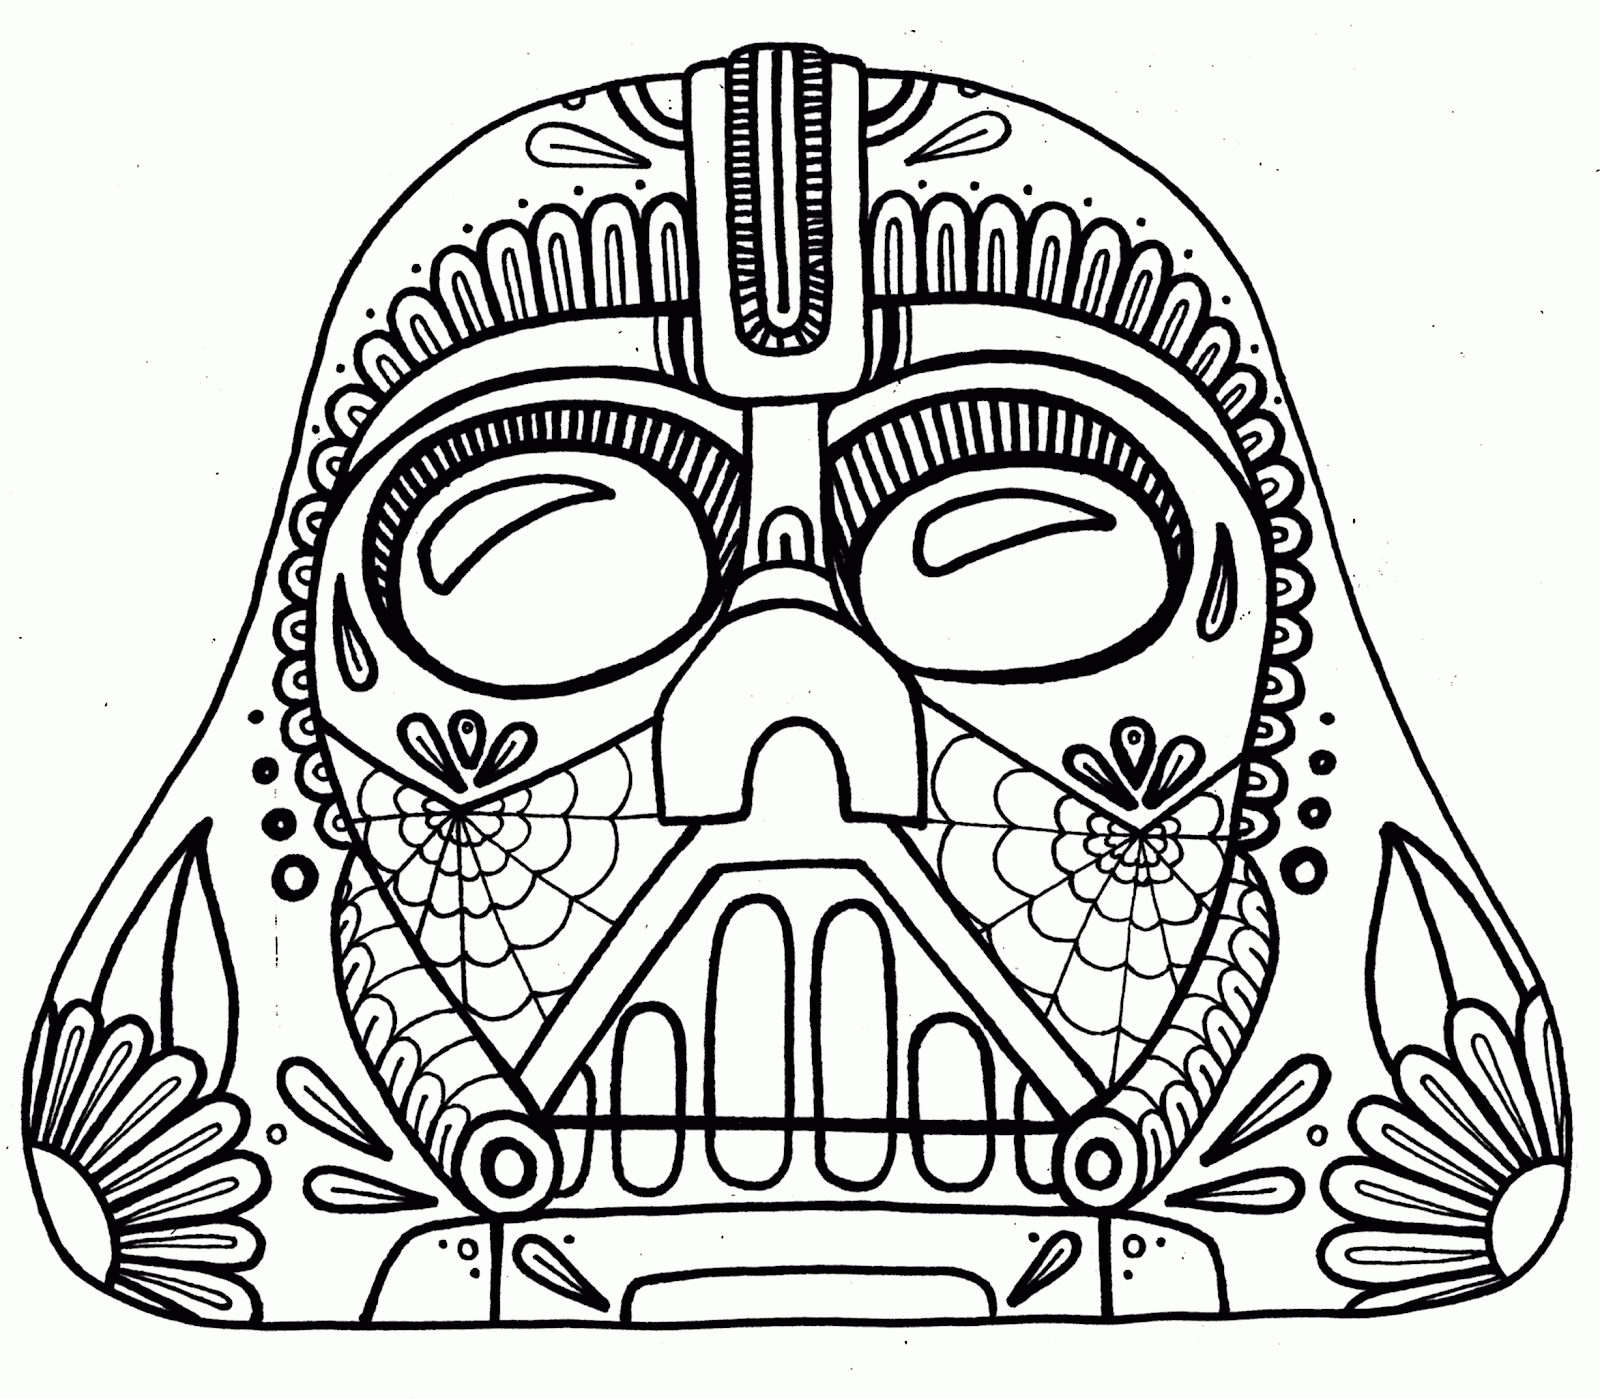 Yucca Flats, N.M.: Wenchkin's coloring pages - Vaders